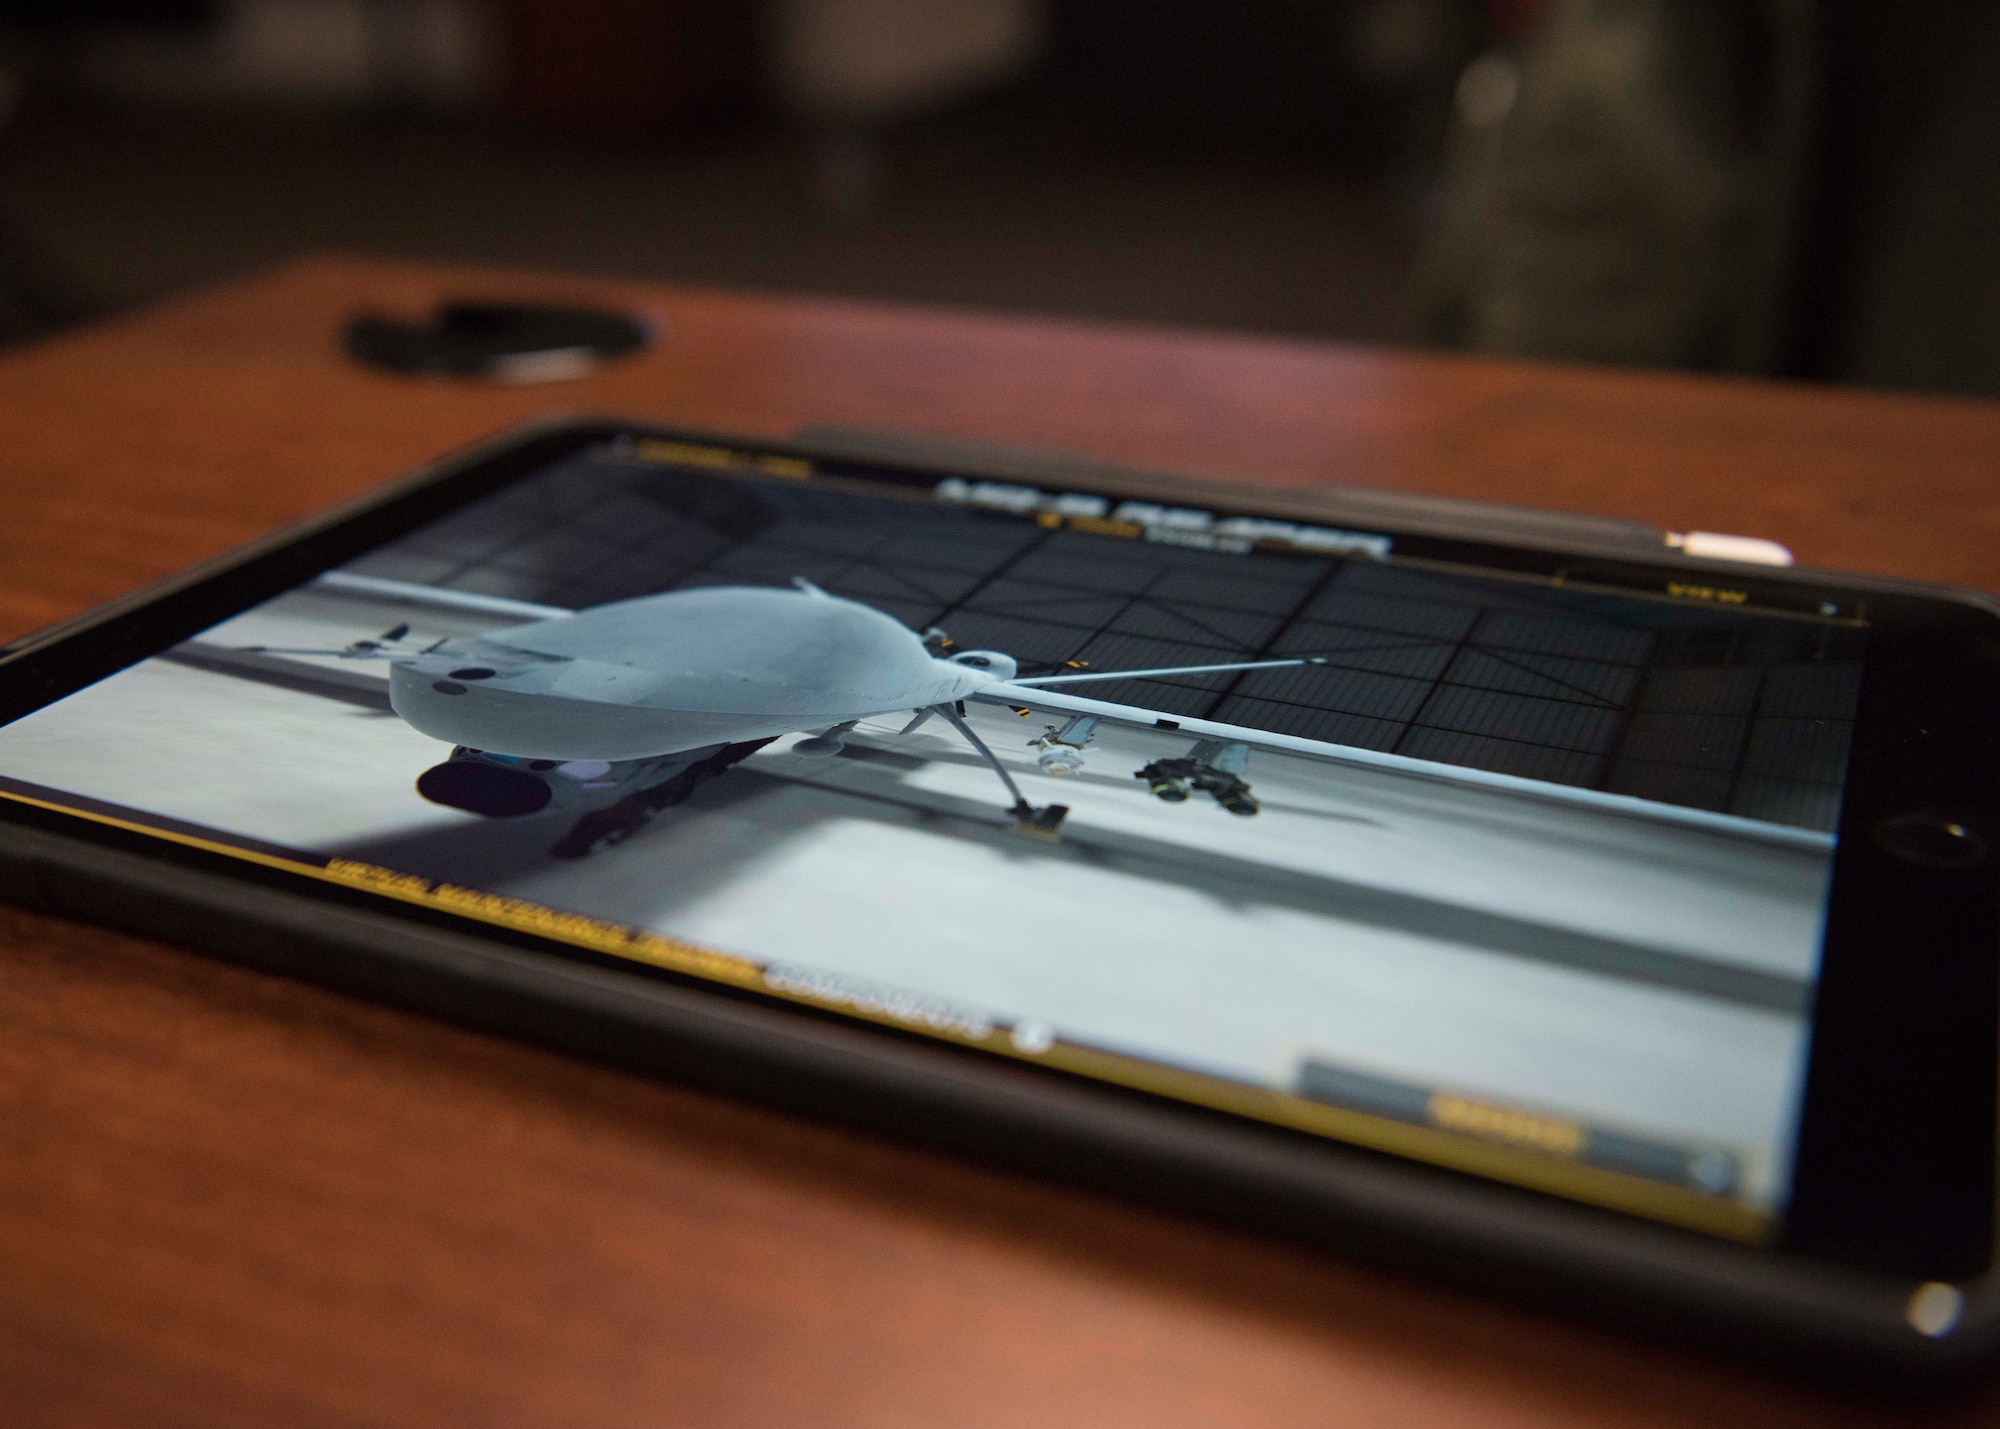 A MQ-9 Reaper is displayed on a 16th Training Squadron Electronic Training Device prototype, Feb. 8, 2019, on Holloman Air Force Base, N.M. The 16th TRS, here, is conducting a MQ-9 Formal Training Unit Innovation project, with the goal of supplementing bulky laptops with tablets that can be used by students in the classroom and in their dorm. (U.S. Air Force photo by Staff Sgt. BreeAnn Sachs)